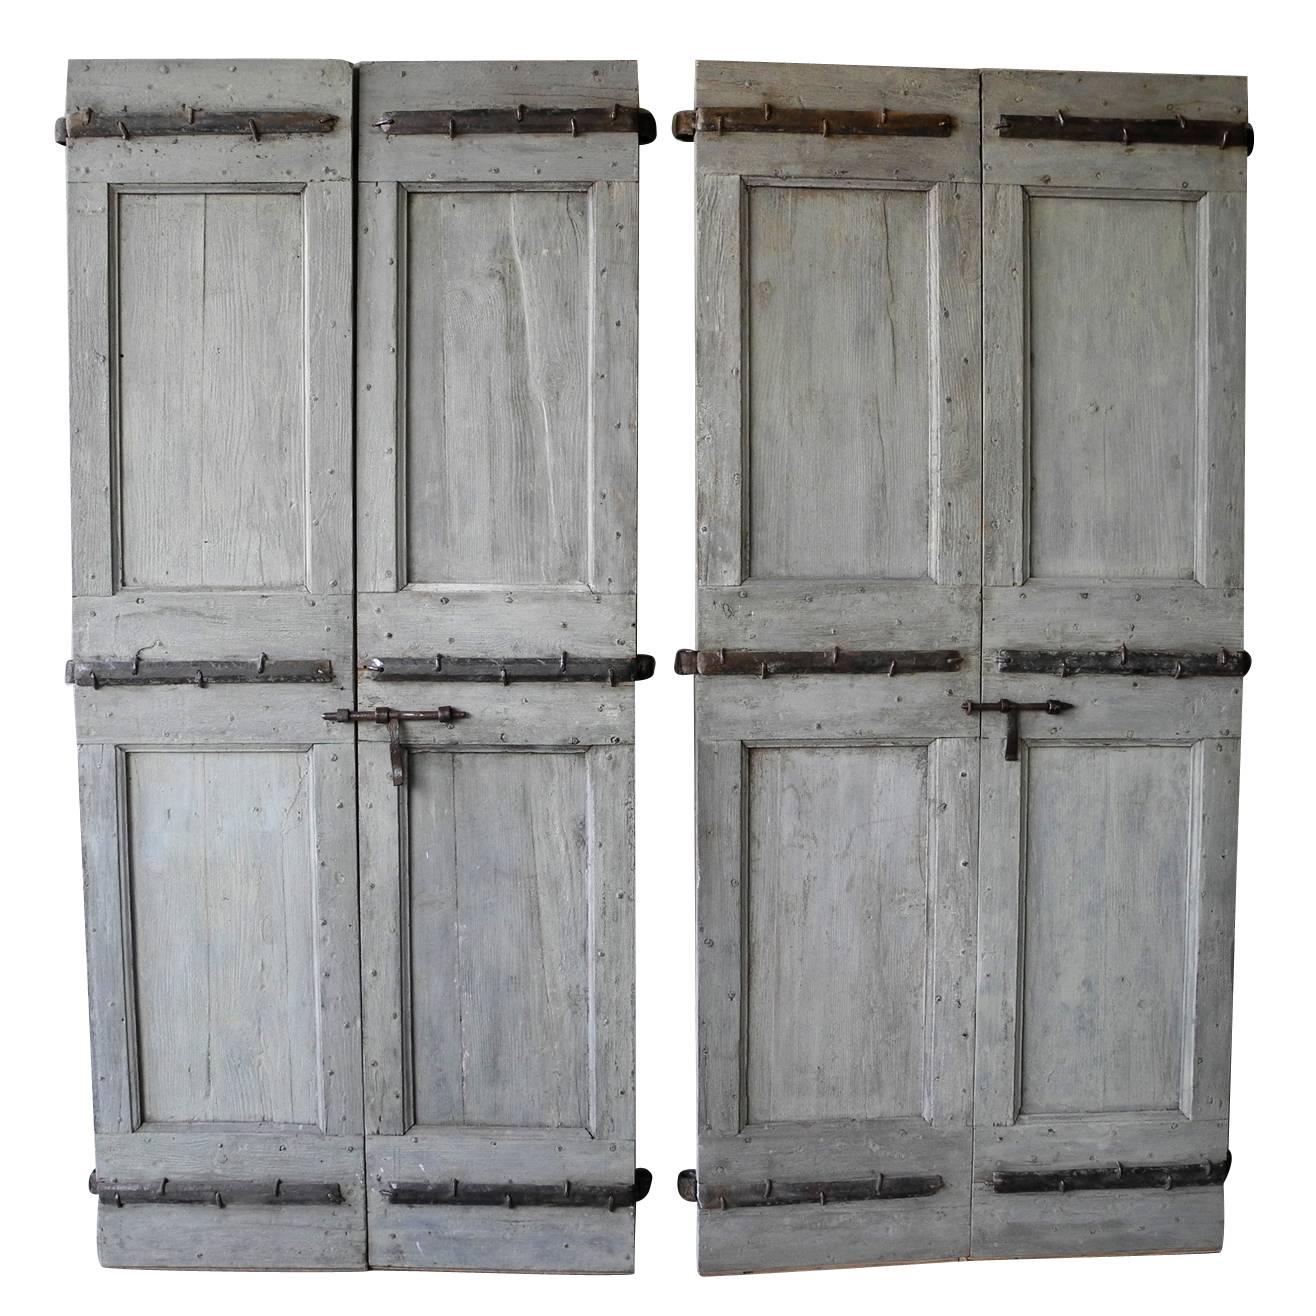 Two Pairs of Antique Shutters